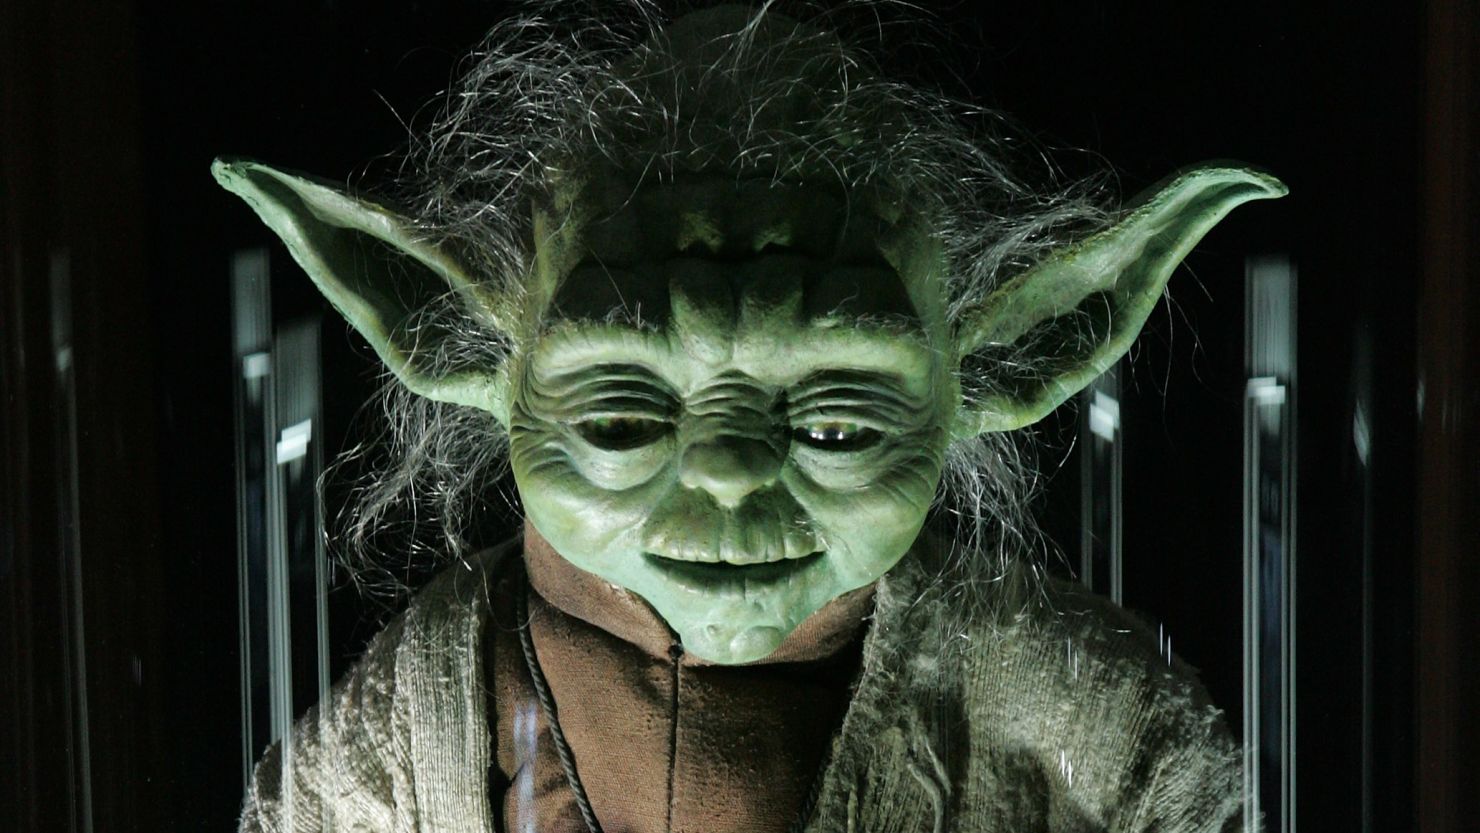 Jedi Master Yoda is one of the characters makeup artist Stuart Freeborn helped develop.